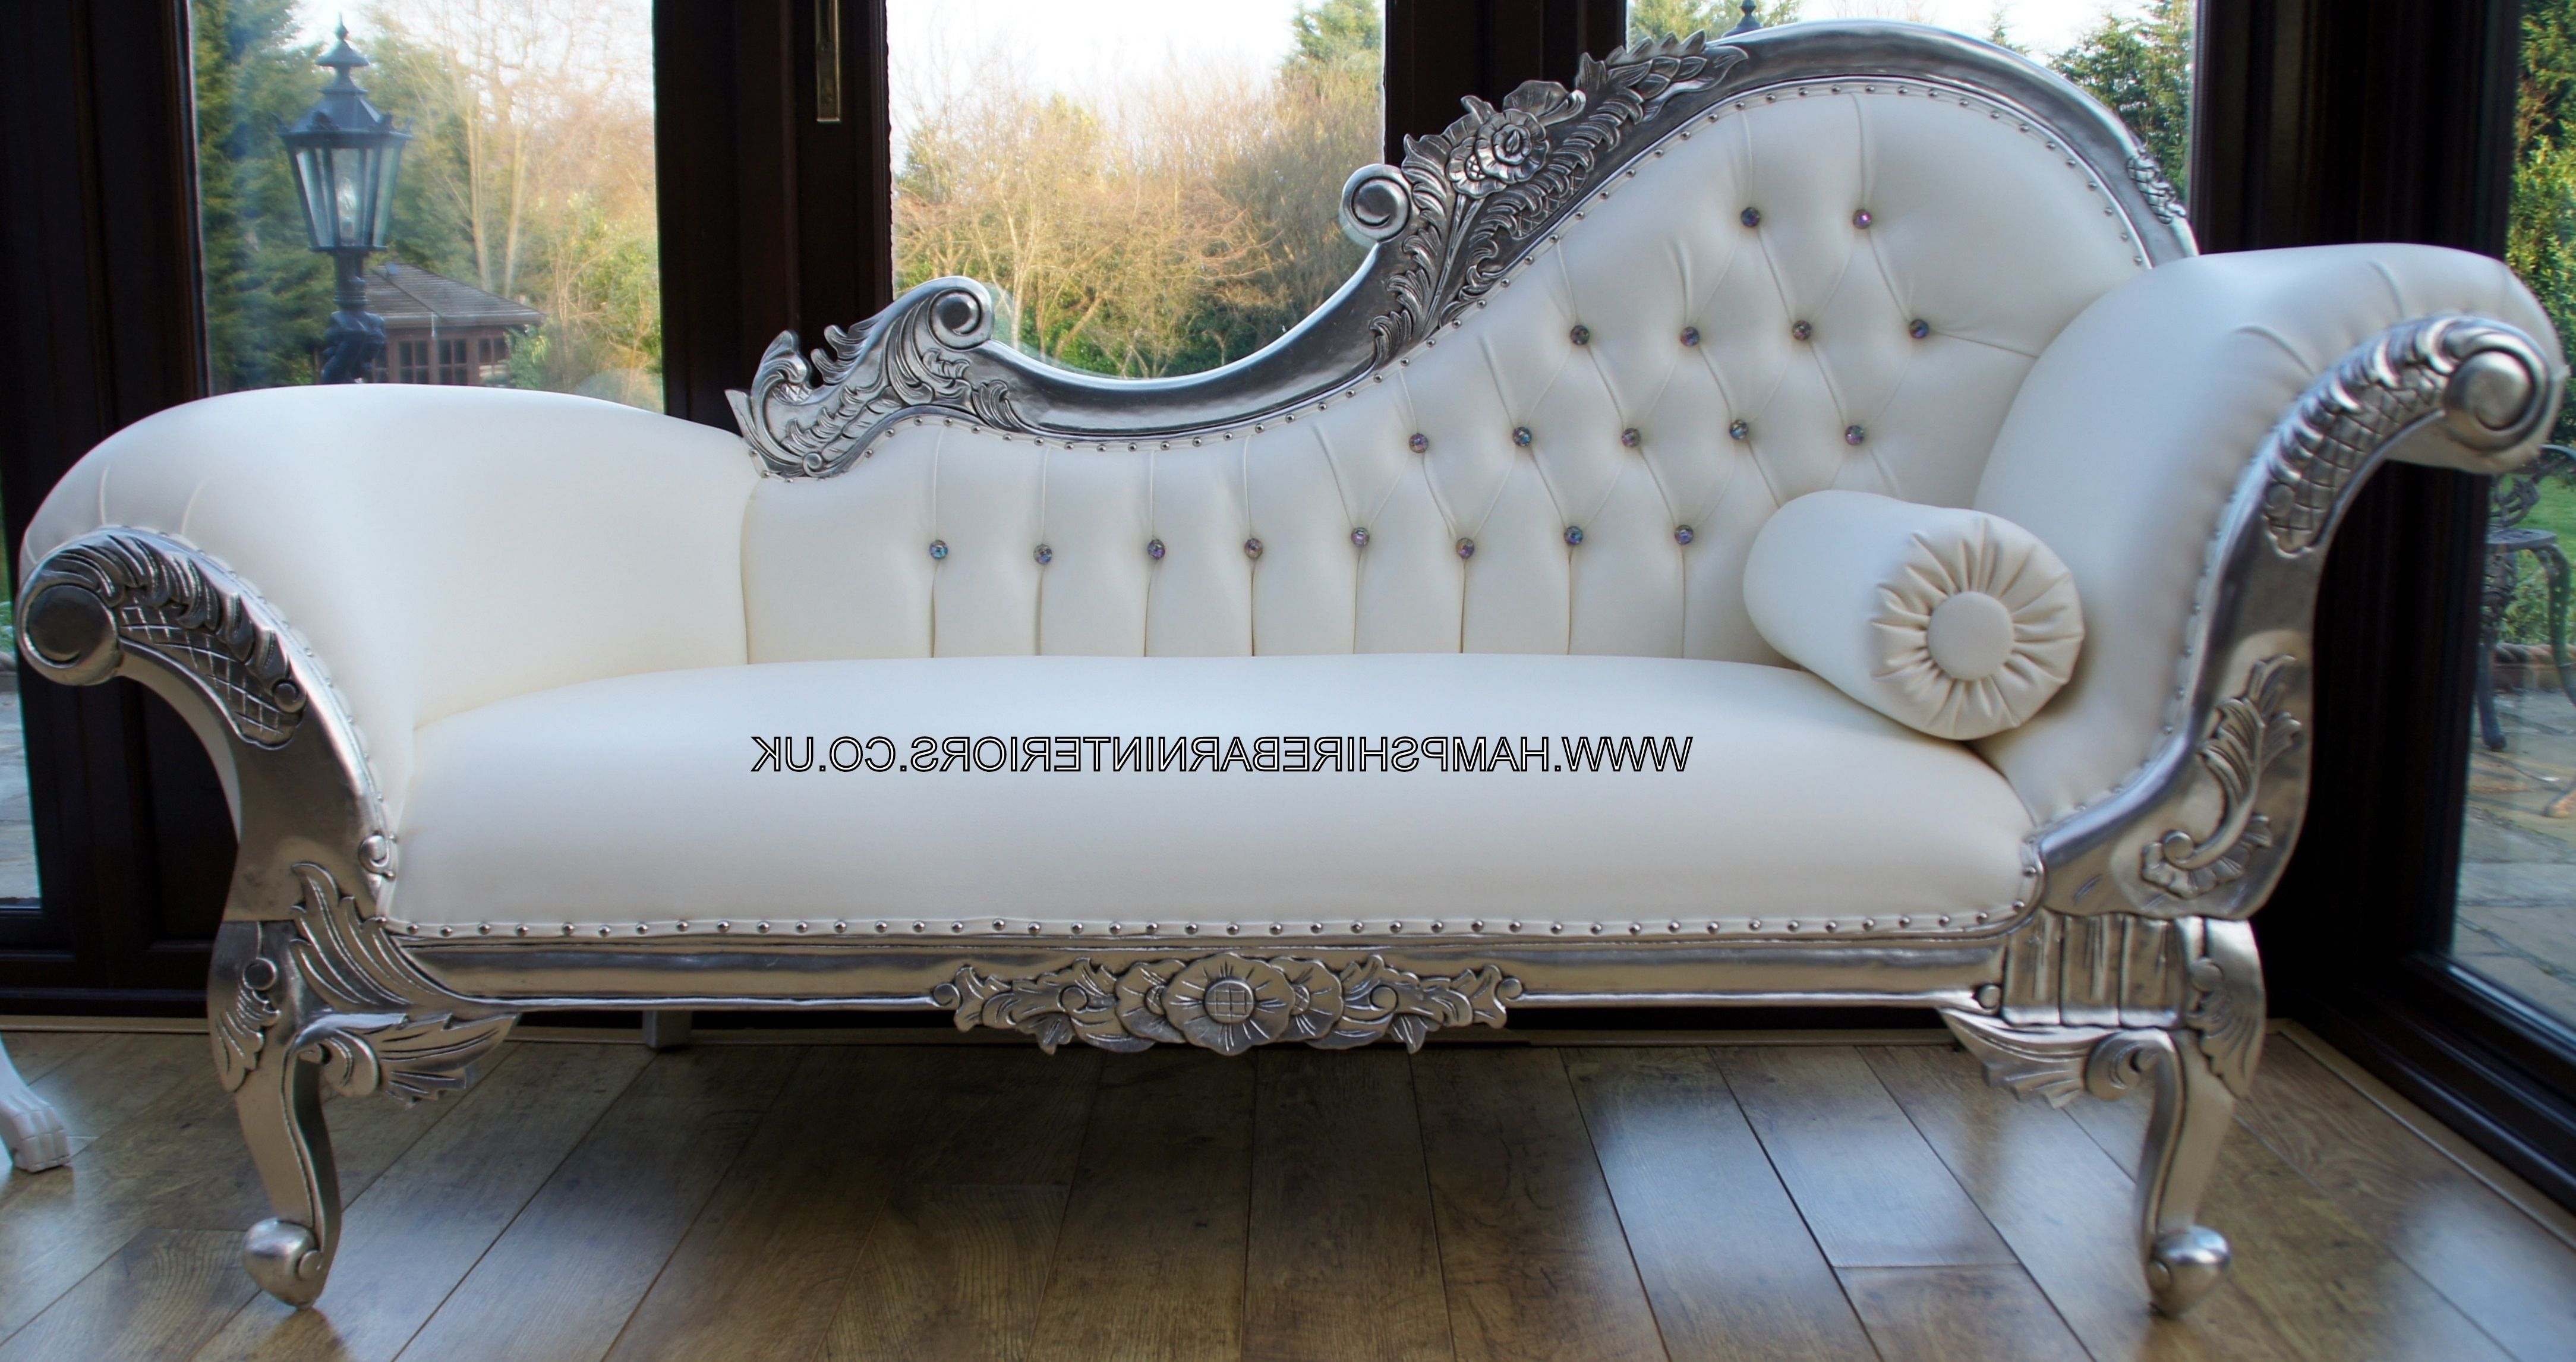 Featured Photo of White Leather Chaise Lounges